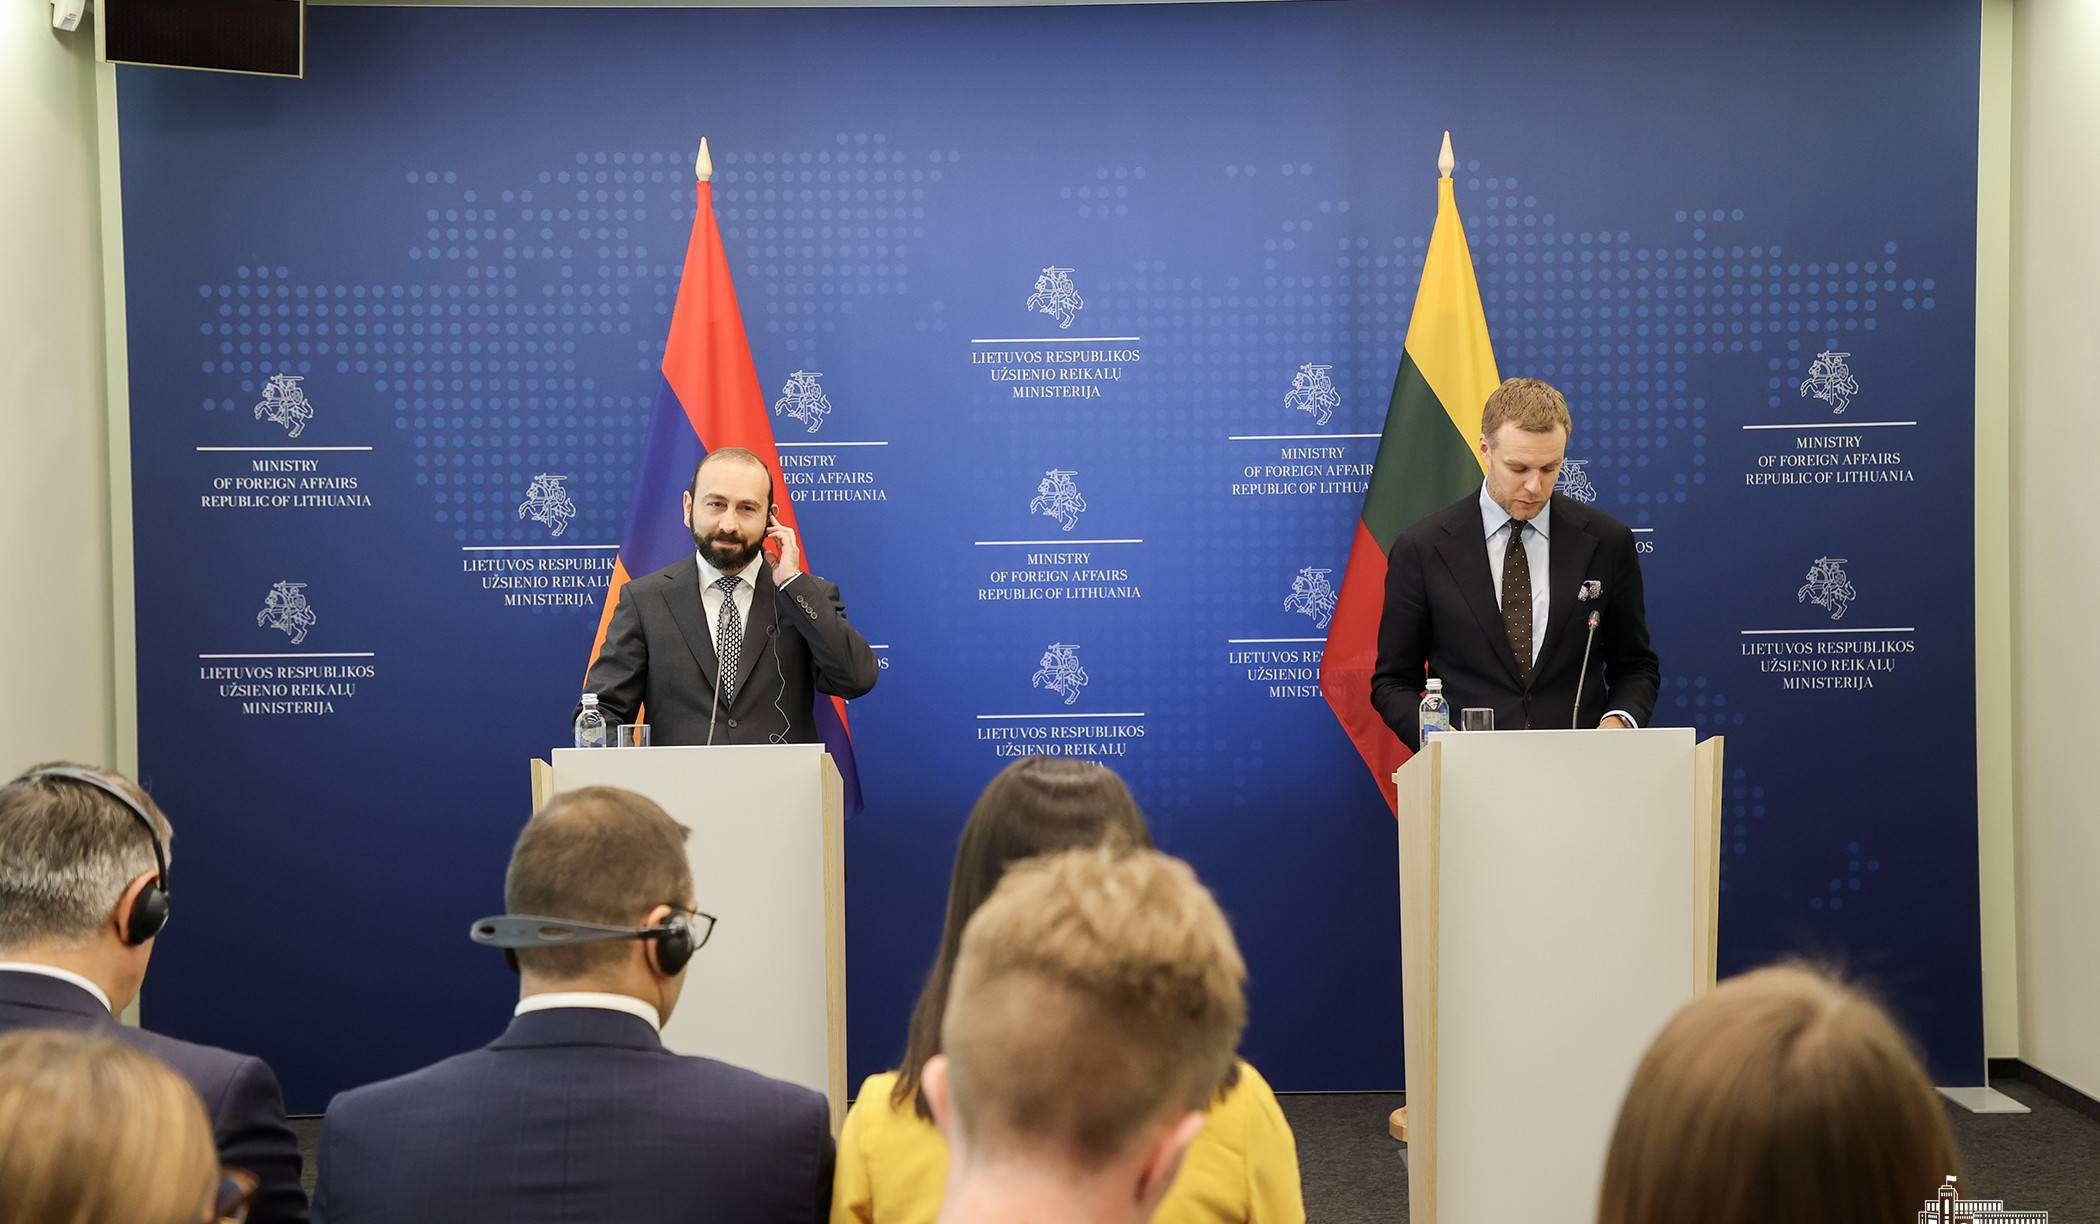 Azerbaijan is bringing new issues which at least raises questions, Mirzoyan